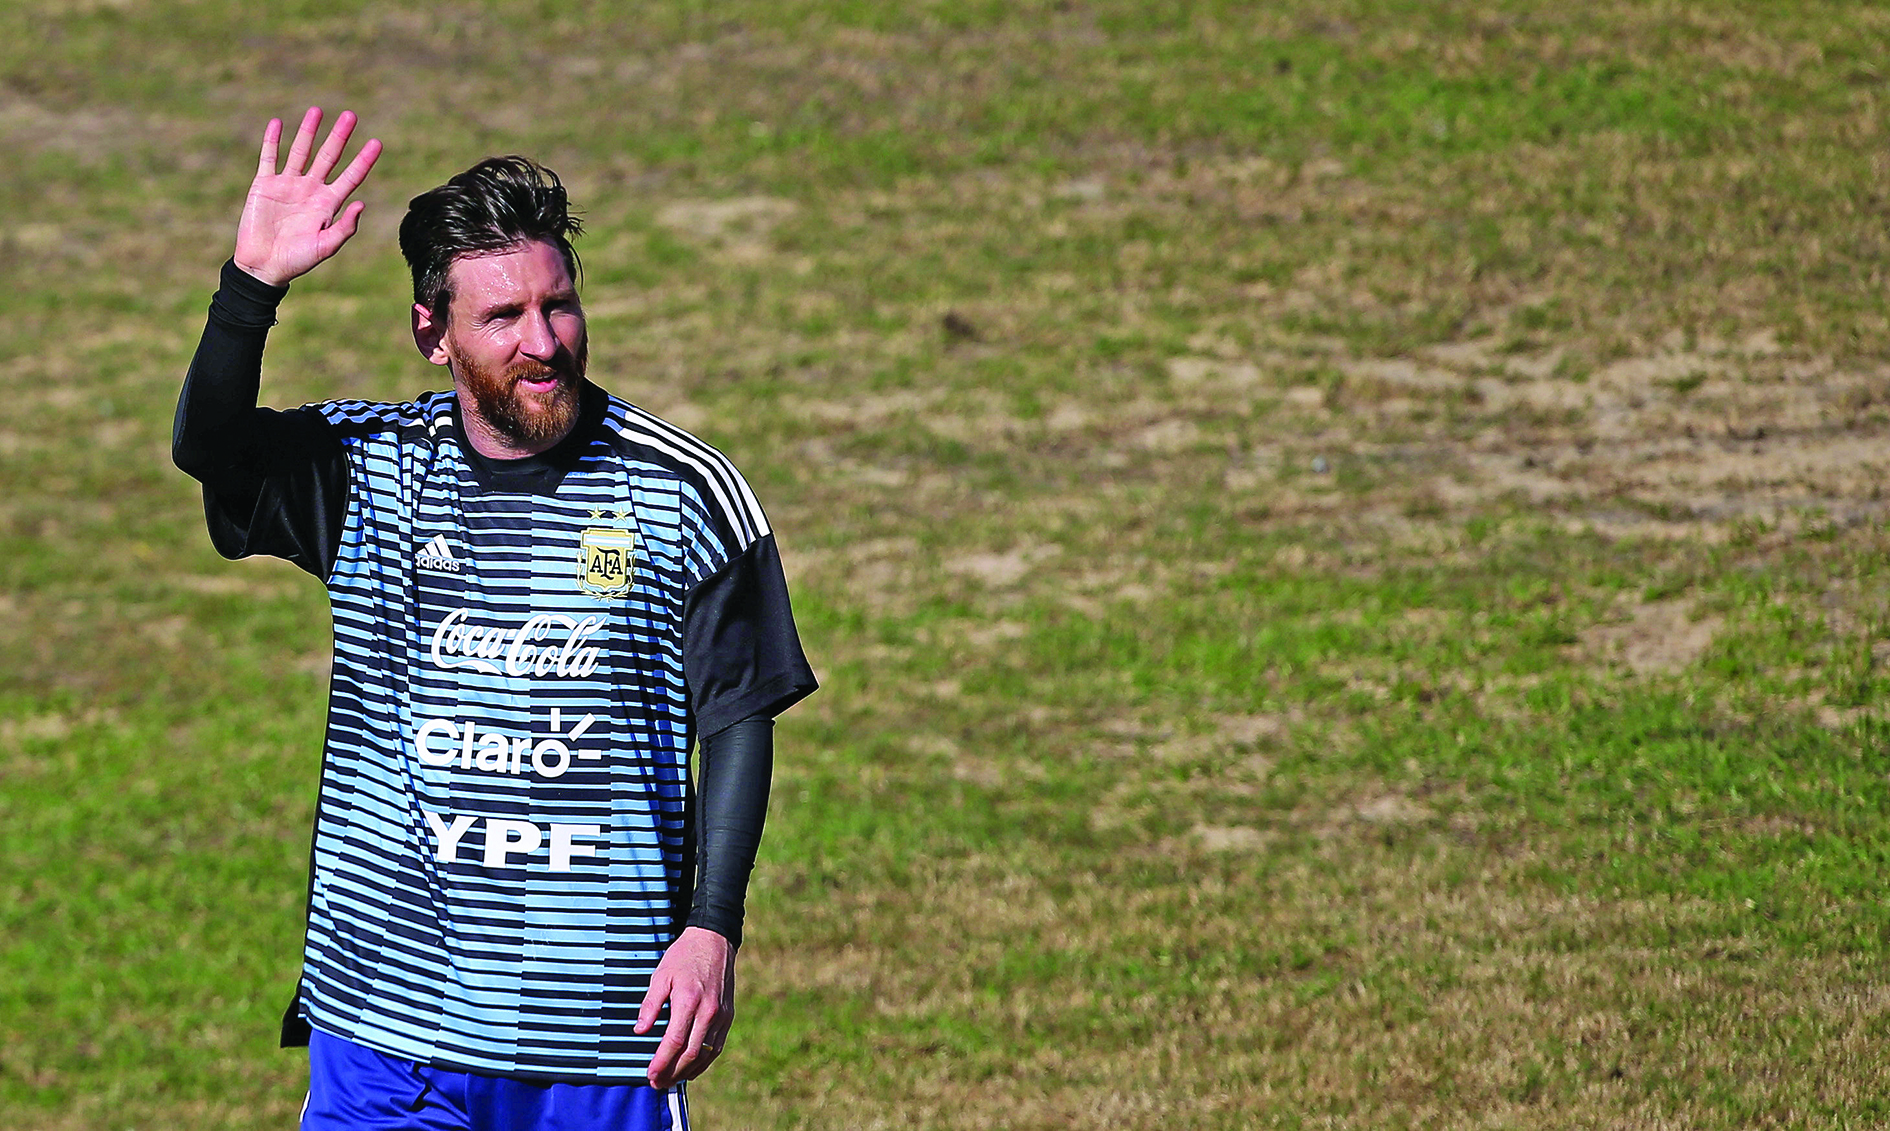 Football: Messi wants to play for Newell's Old Boys